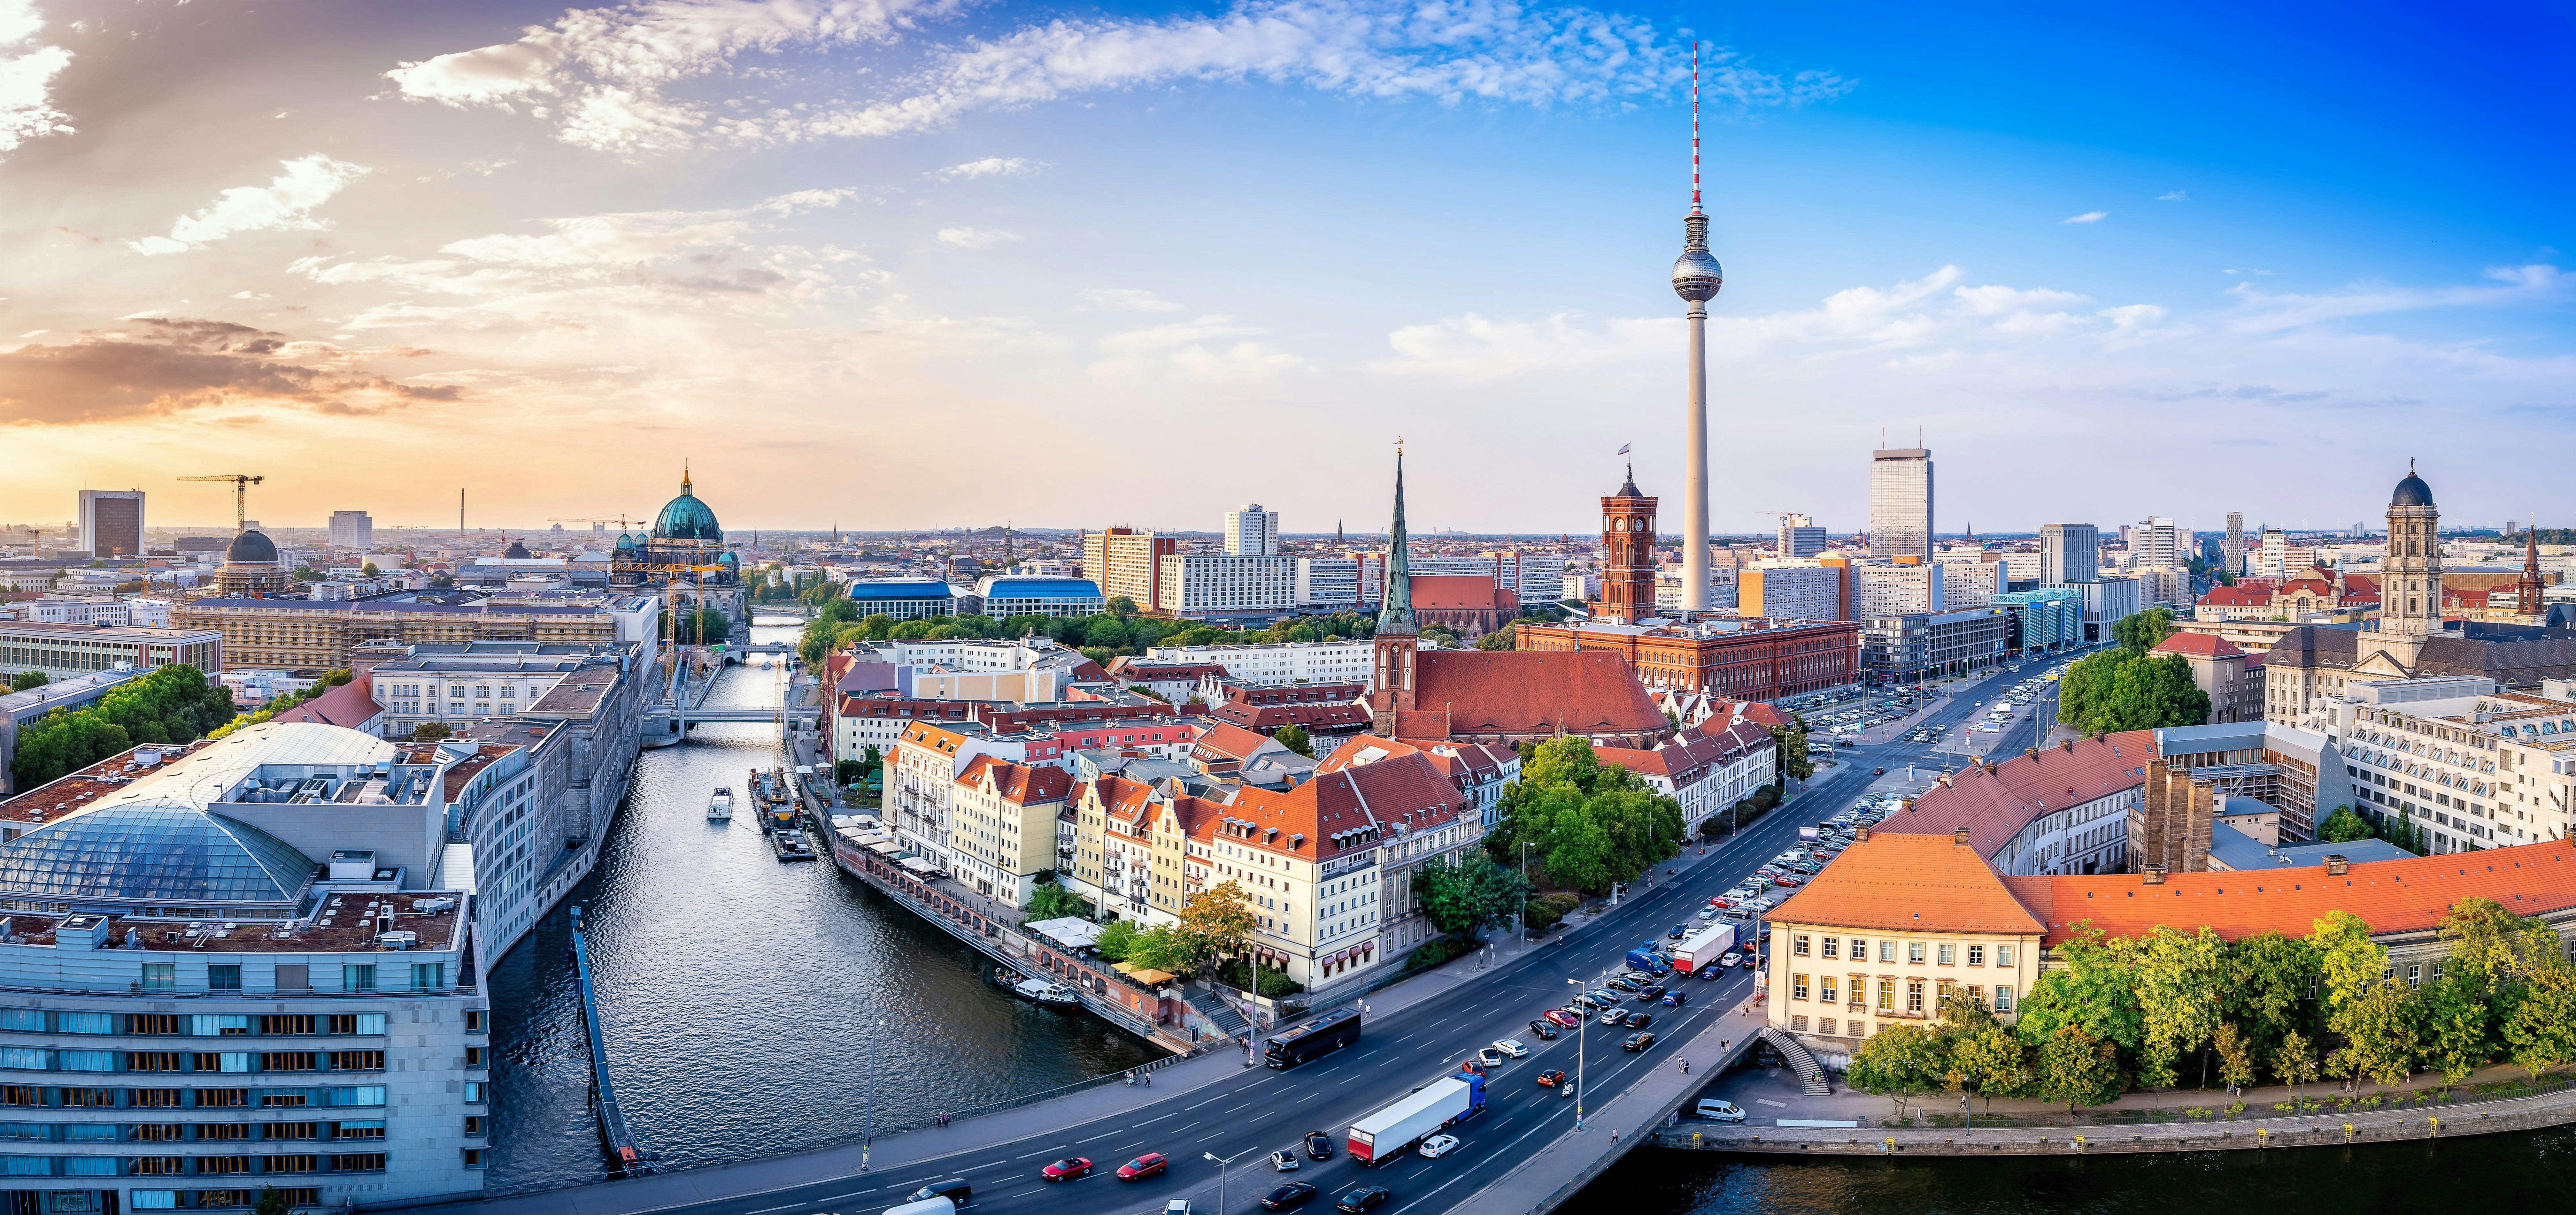 Berlin sightseeing tour of the top 20 attractions Musement